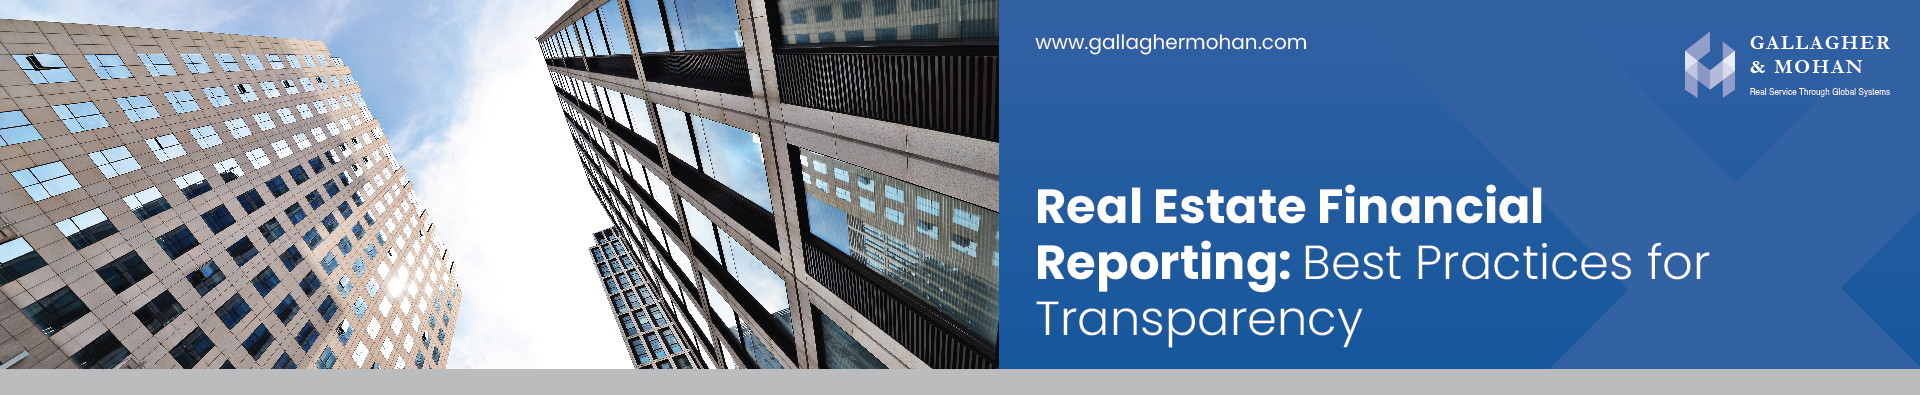 Real Estate Financial Reporting Best Practices For Transparency